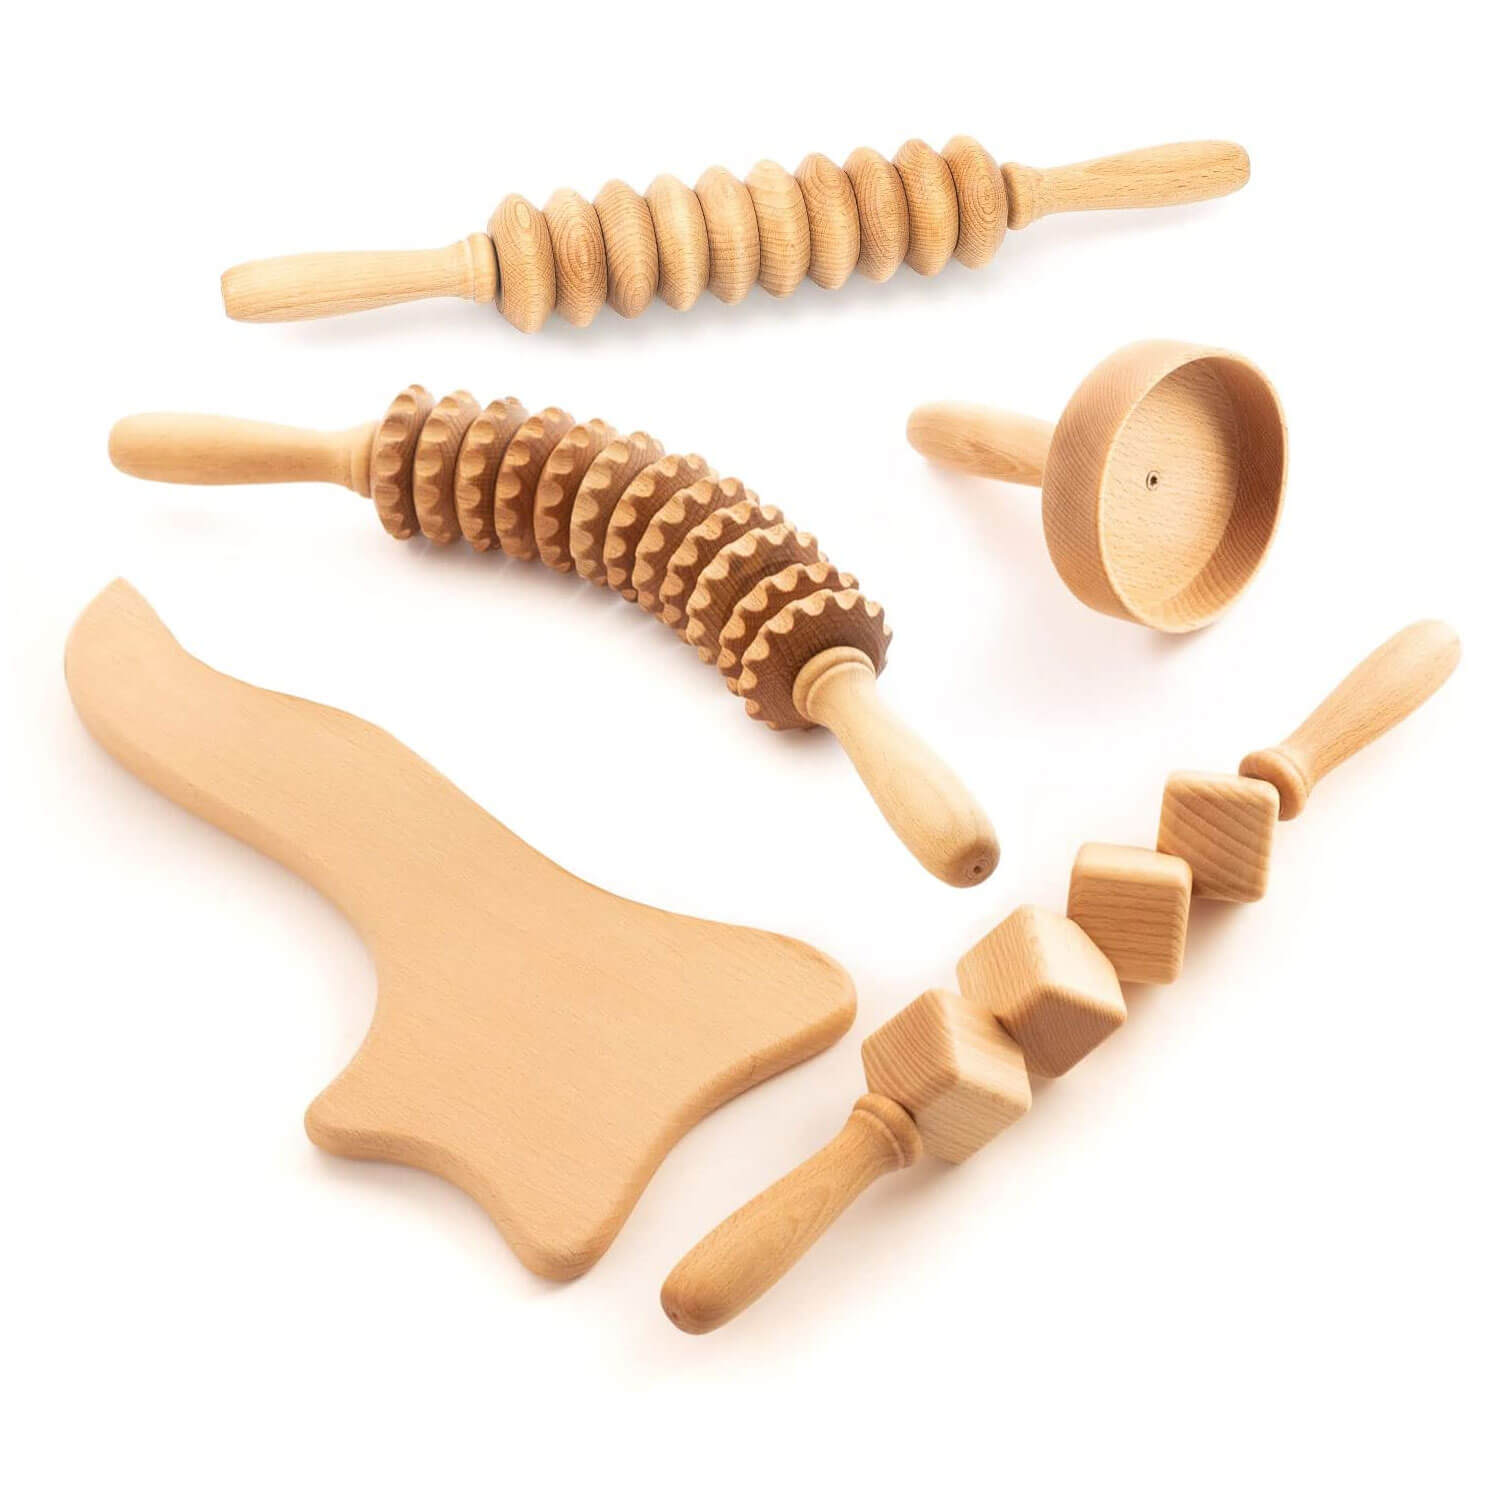 https://cdn.shopify.com/s/files/1/0515/2440/3381/products/maderotherapy-wooden-set-massager-roller-cellulite-lymphatic-drainage-device-swedish-cup-703.jpg